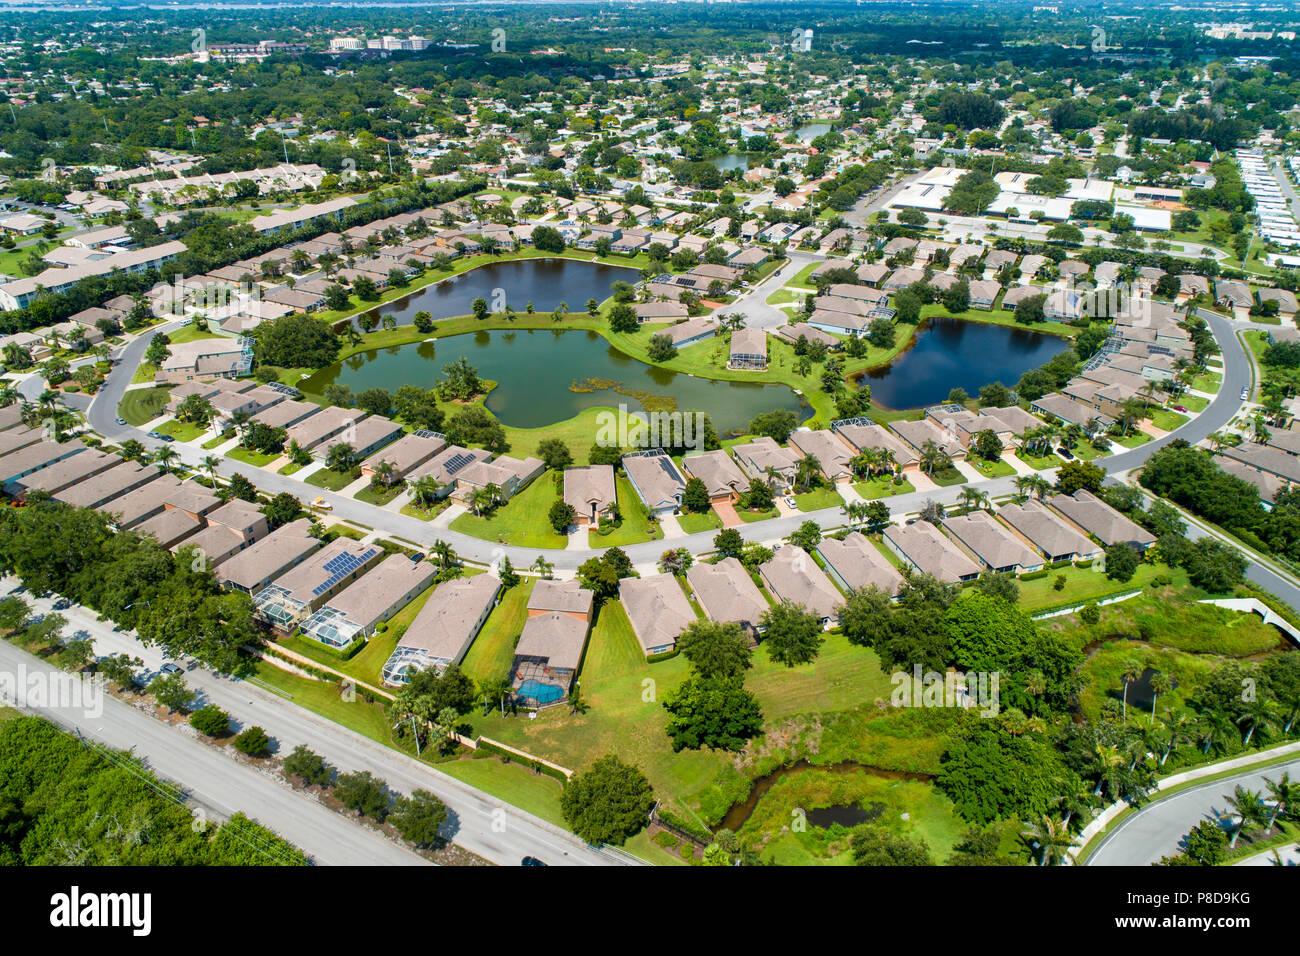 Aerial view of a Planned Bradenton Florida residential 55+ retirement community of single family condominium homes surrounding a small lakes with a ga Stock Photo